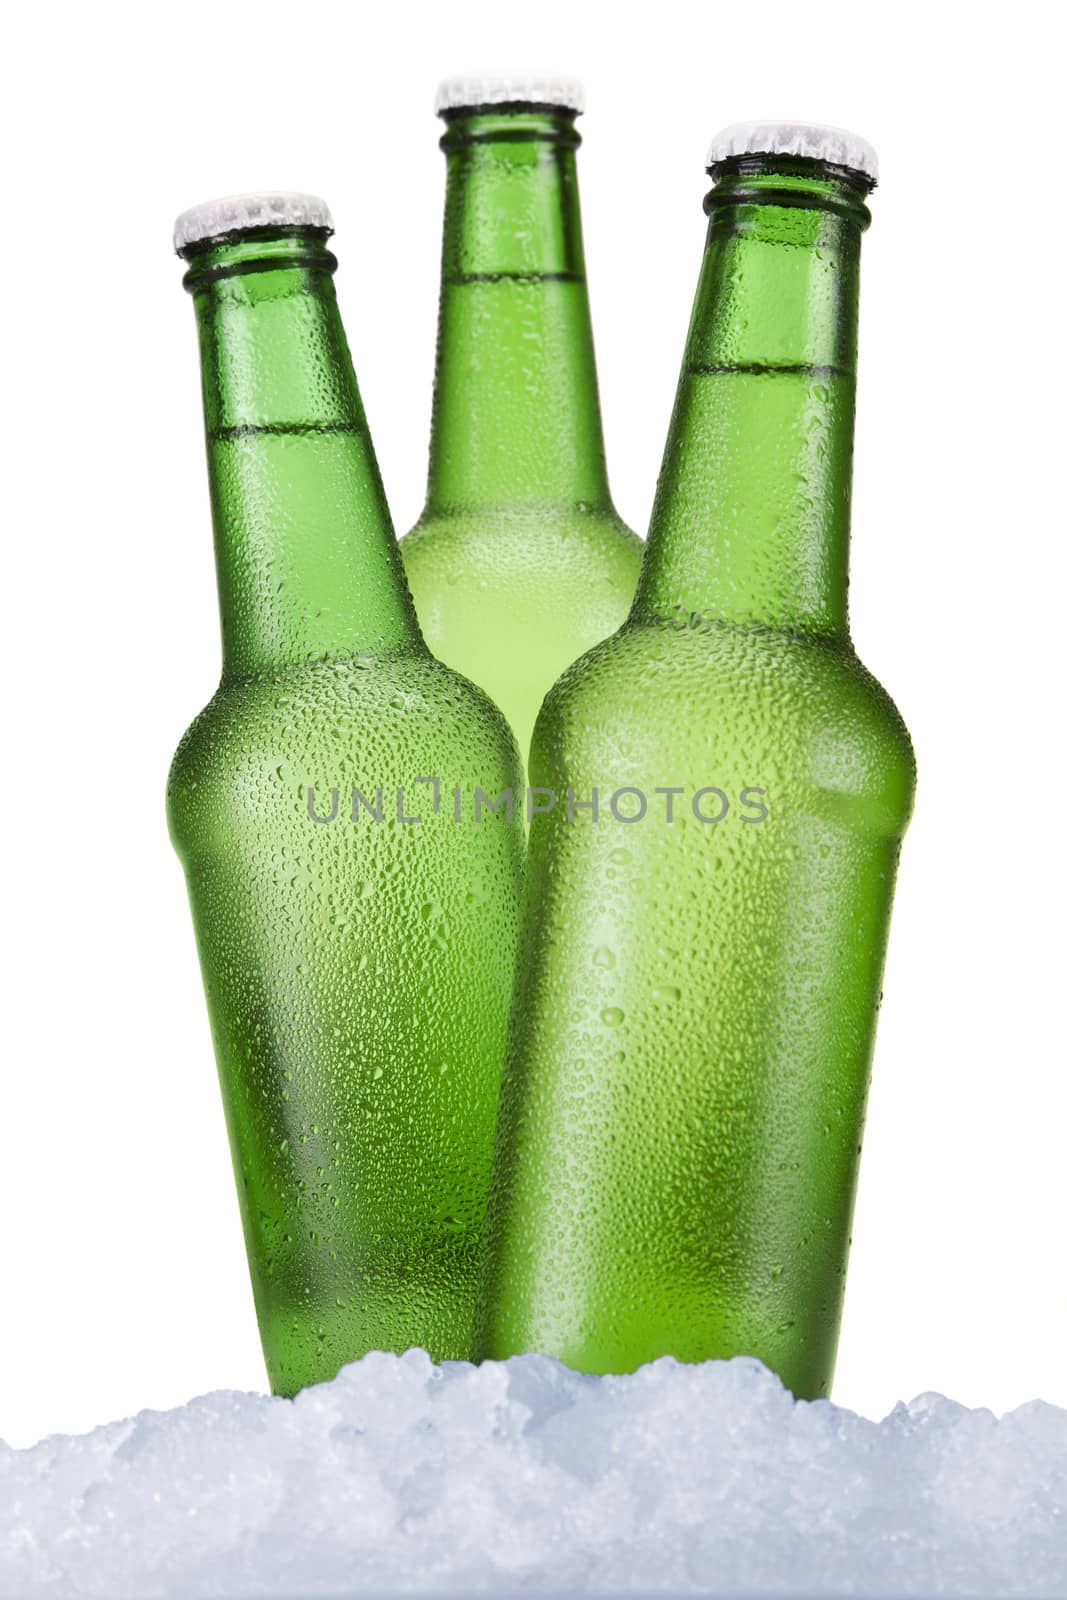 Three green beer bottles sitting on ice over a white background.